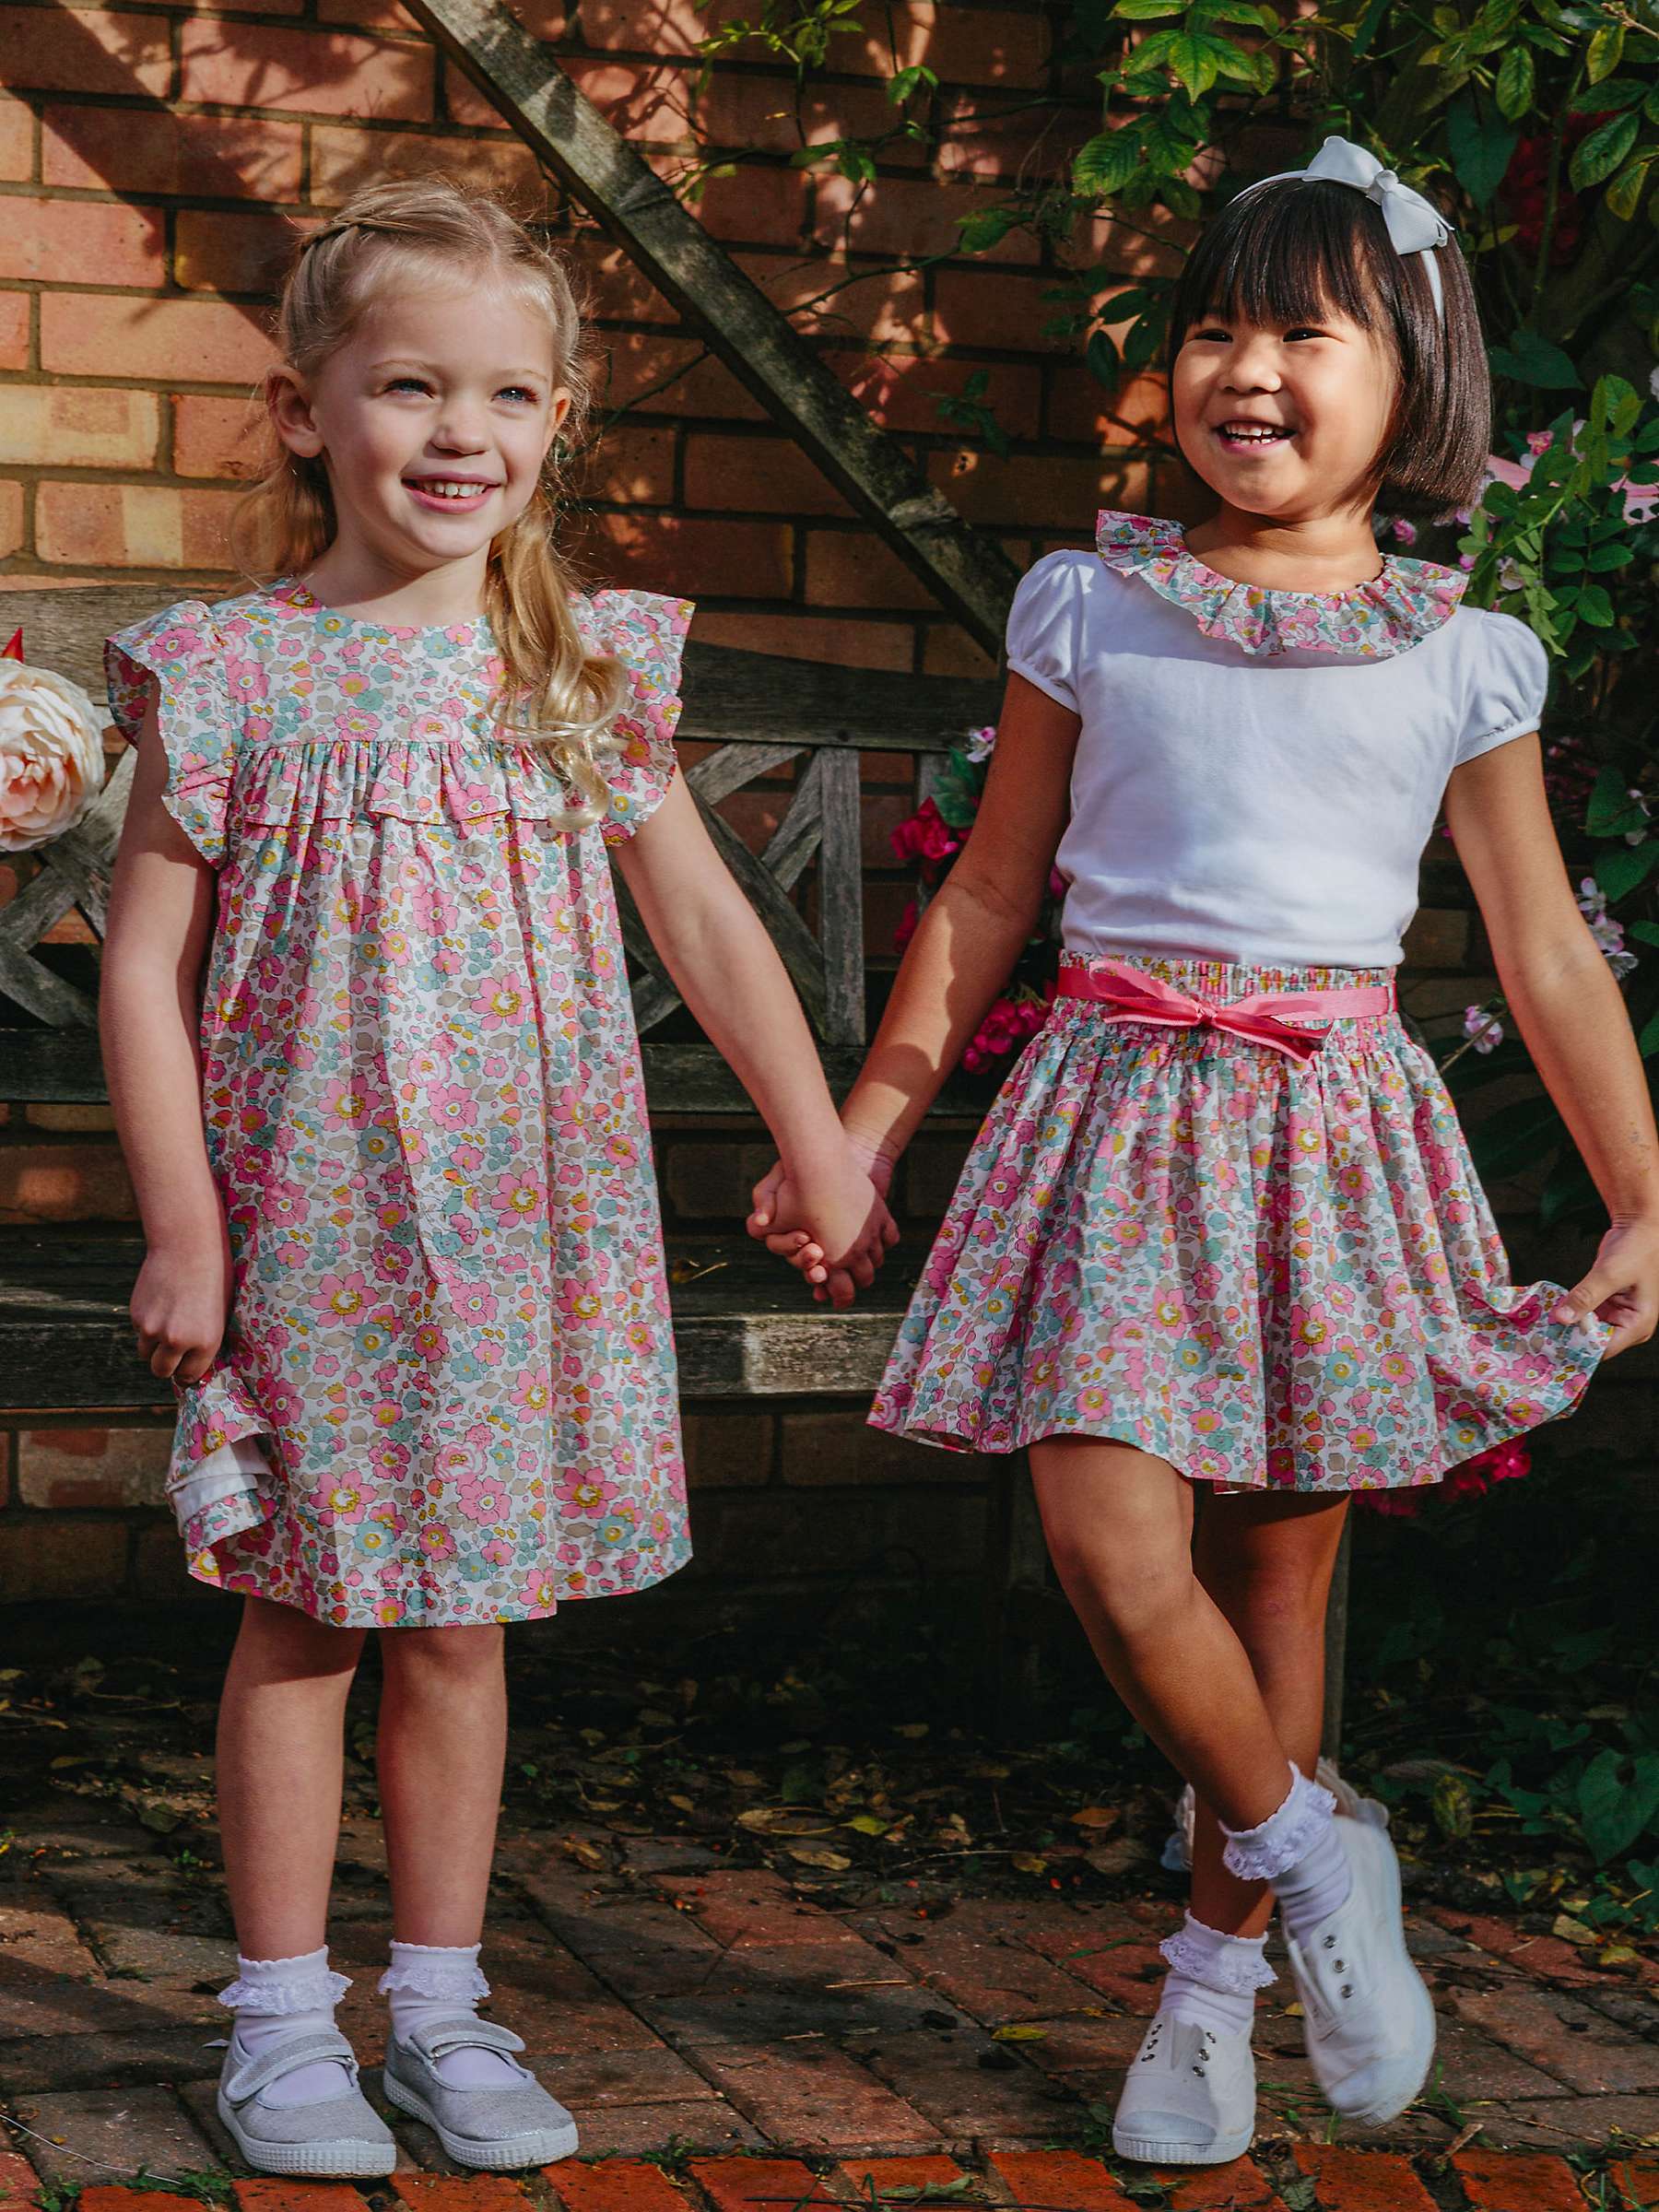 Buy Trotters Kids' Liberty's Betsy Bow Floral Print Skirt, Coral Online at johnlewis.com